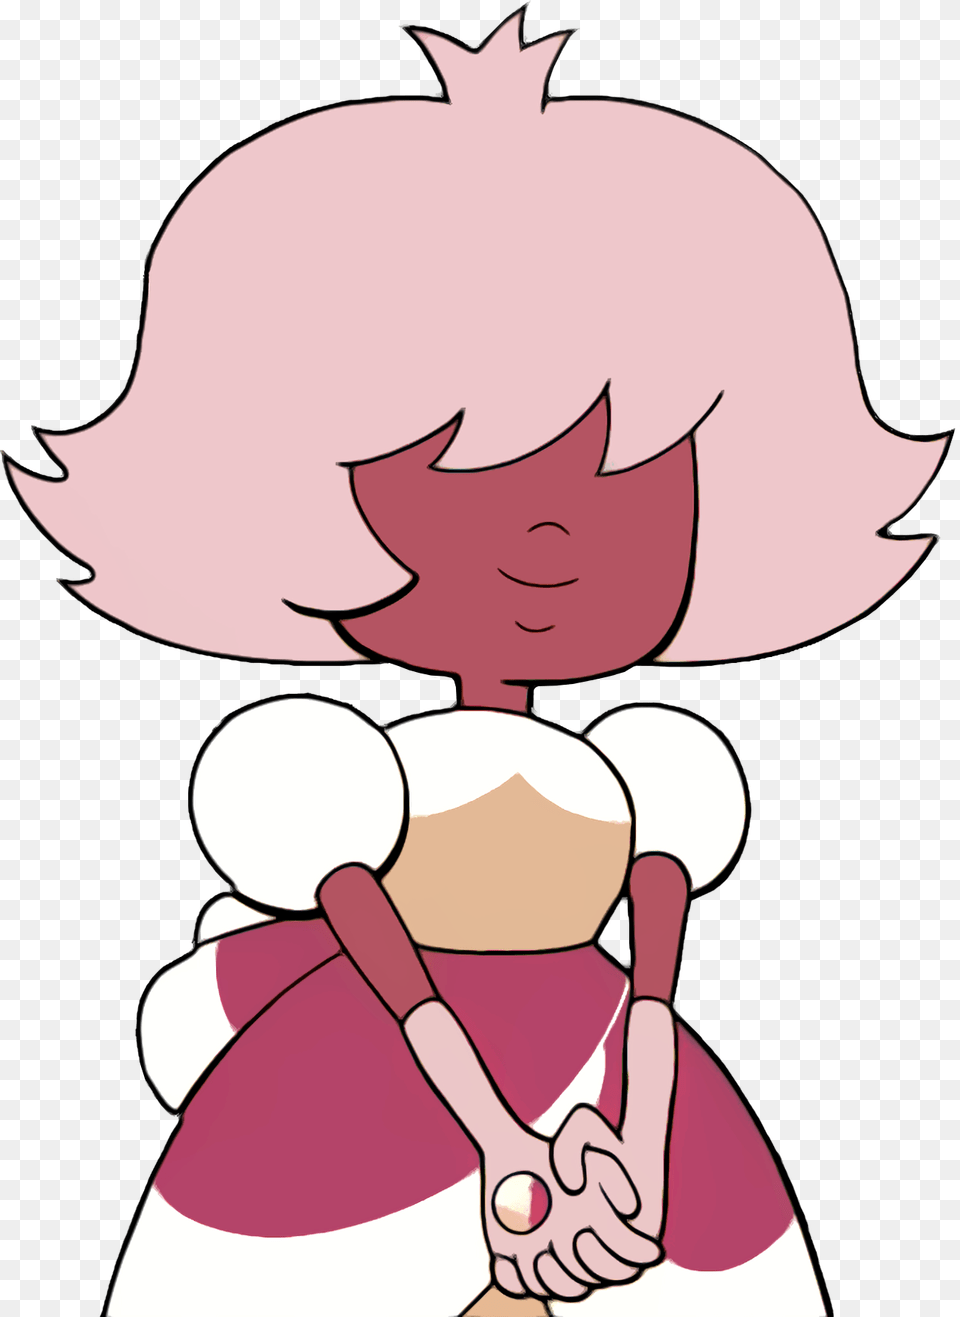 My Favorite Cinnamon Roll Steven Universe Know Your Meme, Baby, Person, People, Book Free Transparent Png